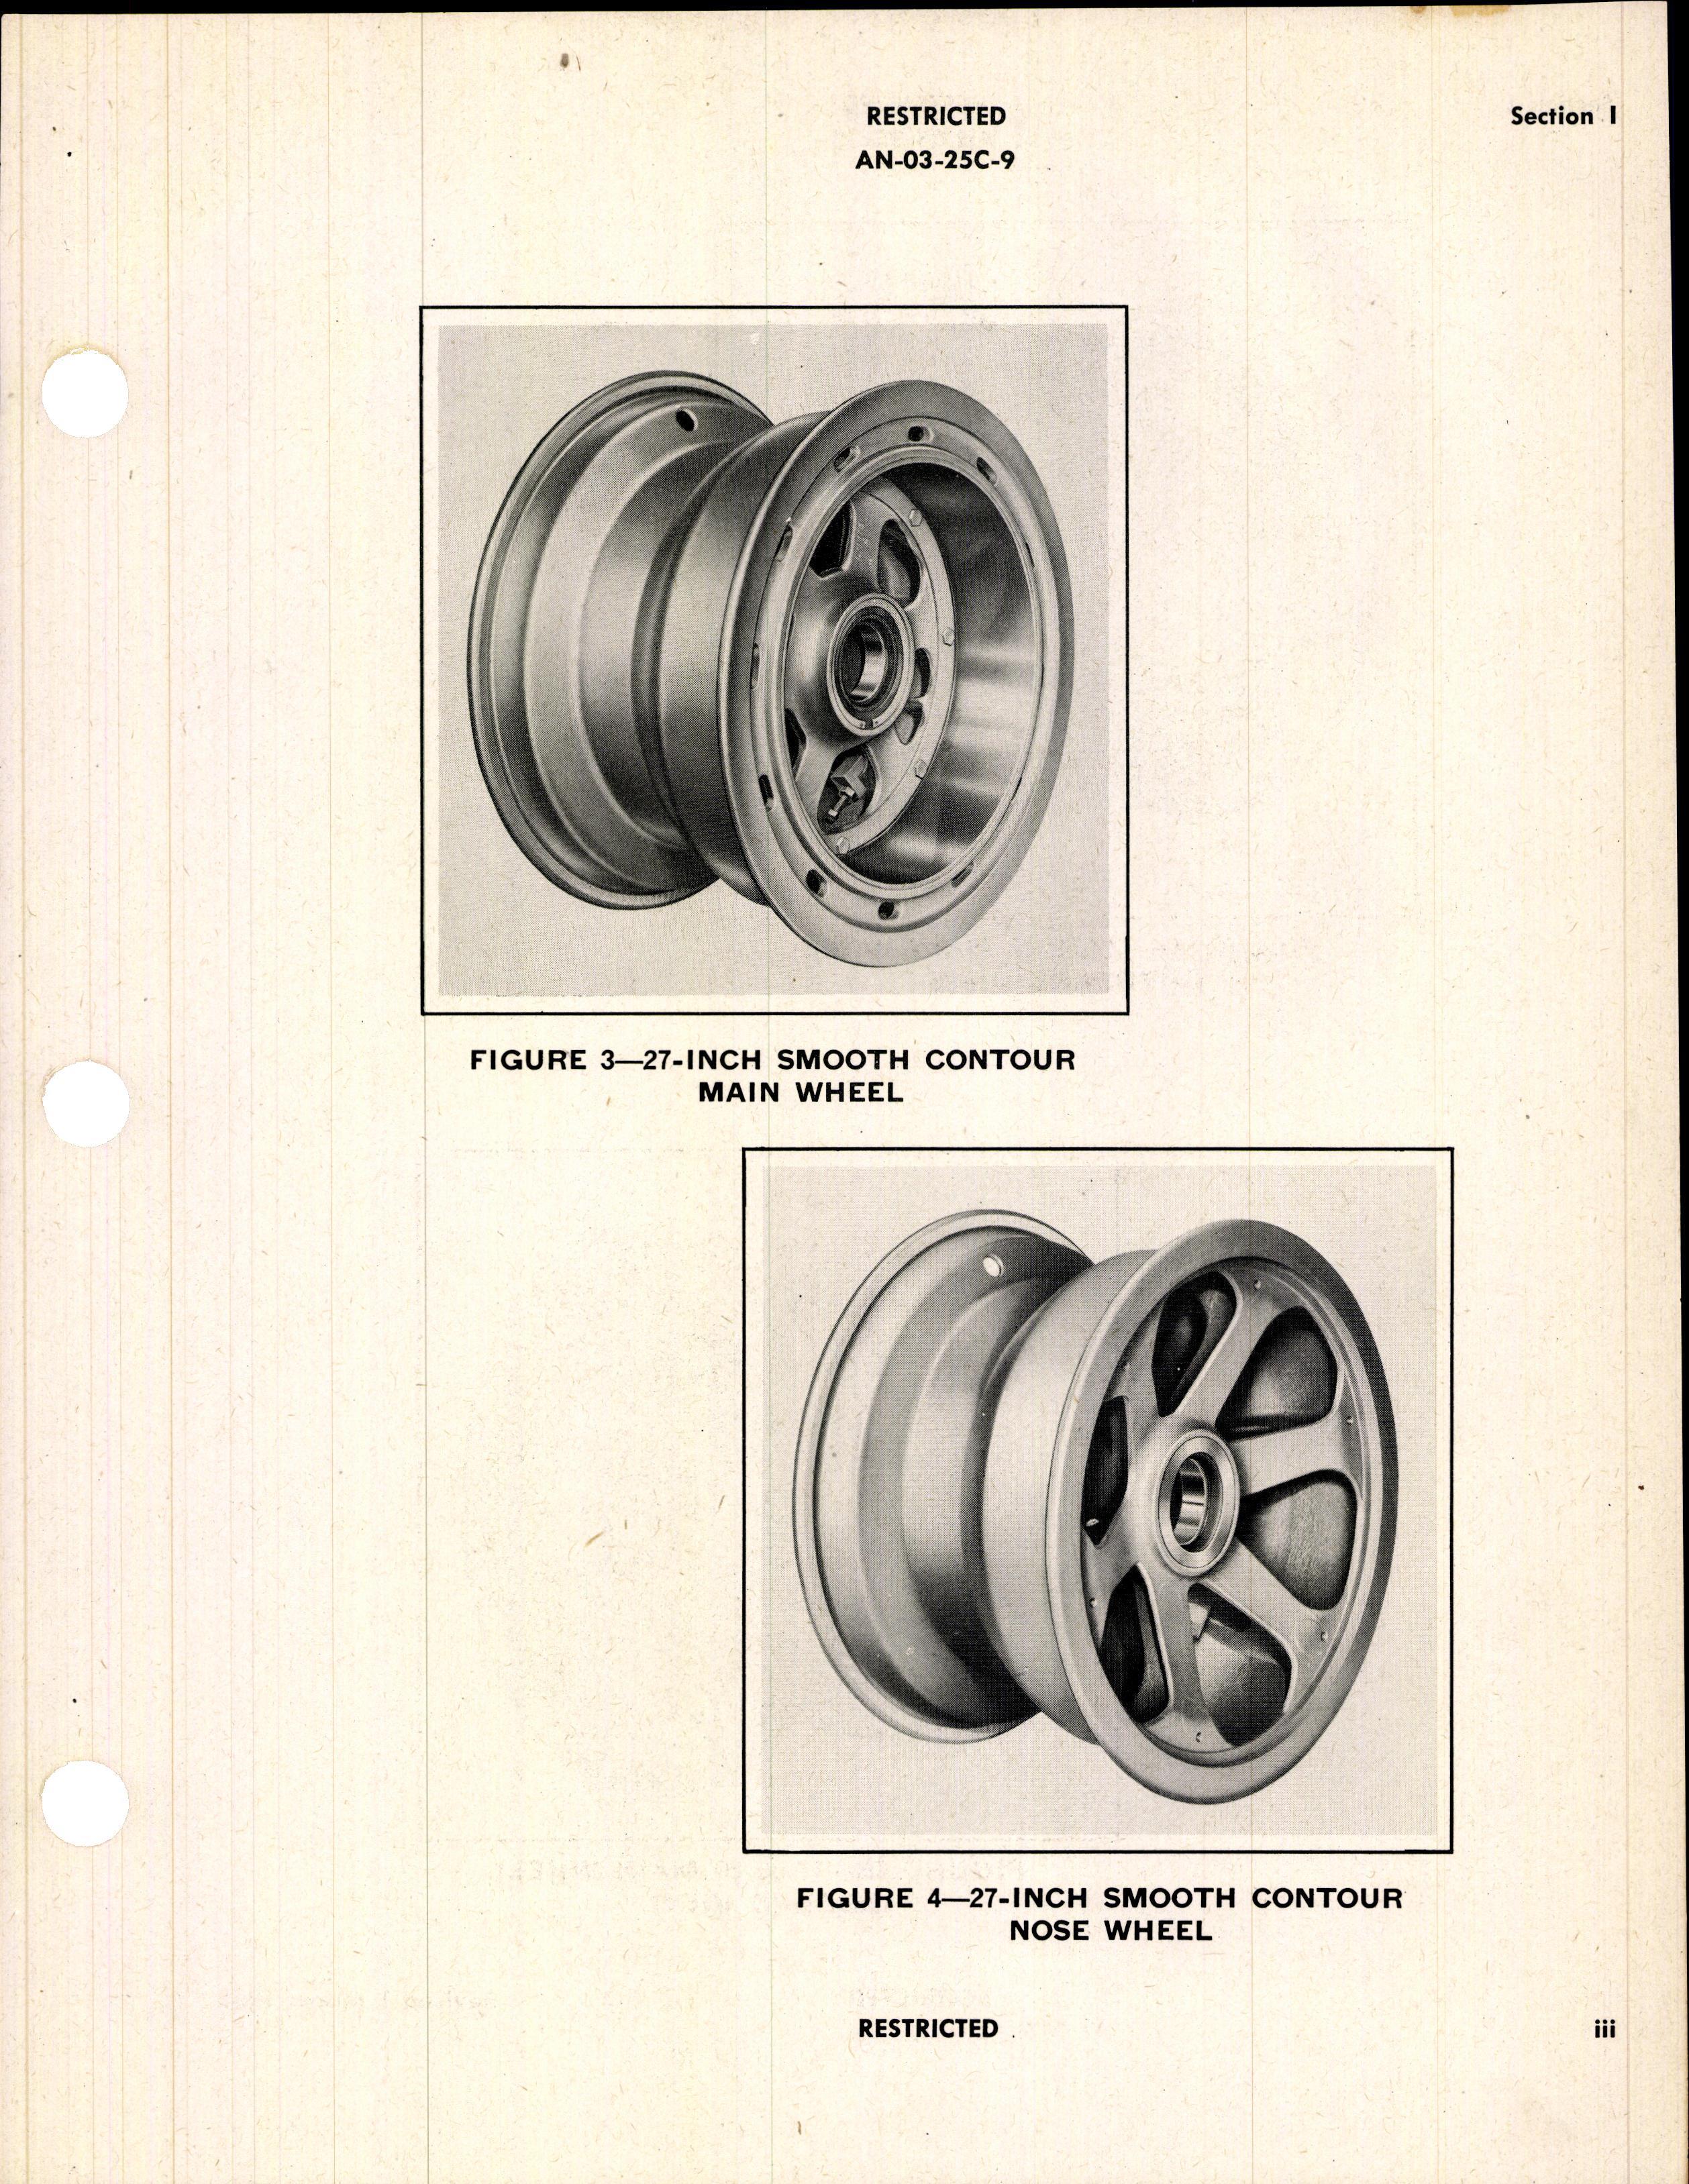 Sample page 5 from AirCorps Library document: Handbook of Instructions with Parts Catalog for Bendix Wheels